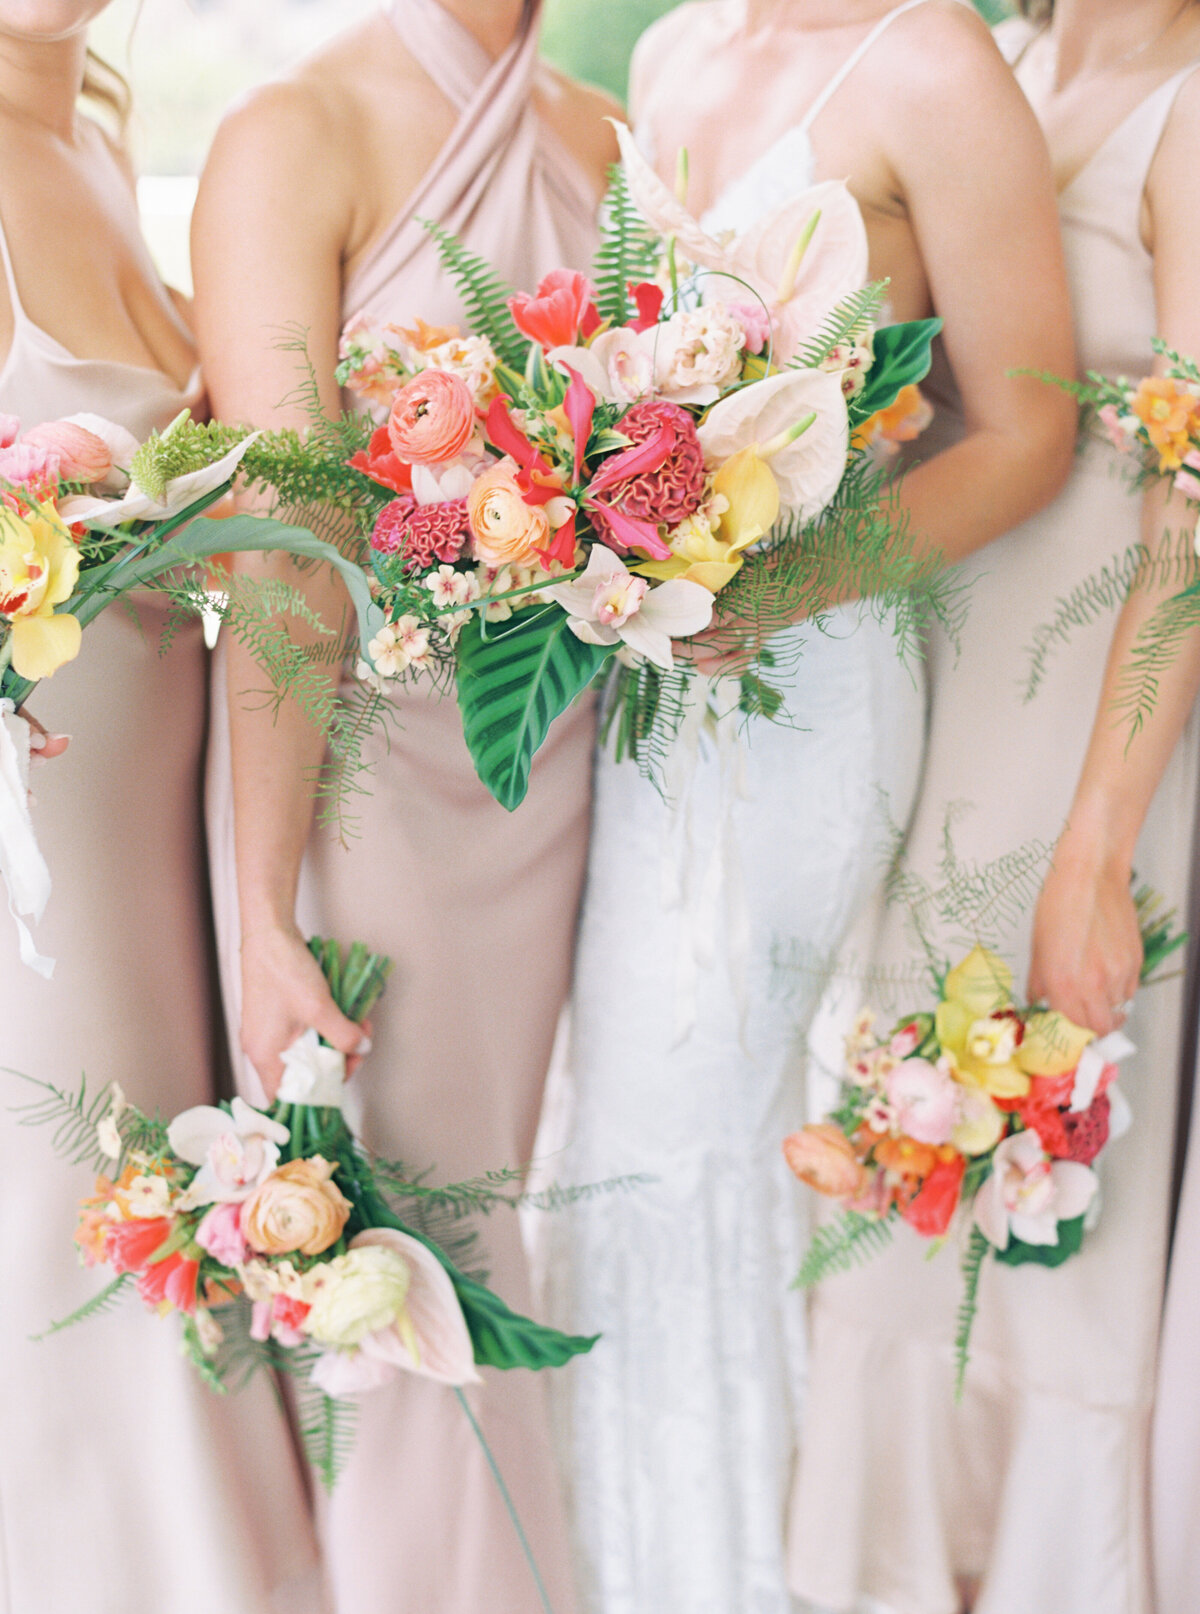 Tropical bride and bridesmaids flowers. Colorful spring Gadsden House wedding. Bridesmaids in muted dresses with pop of color tropical flowers.